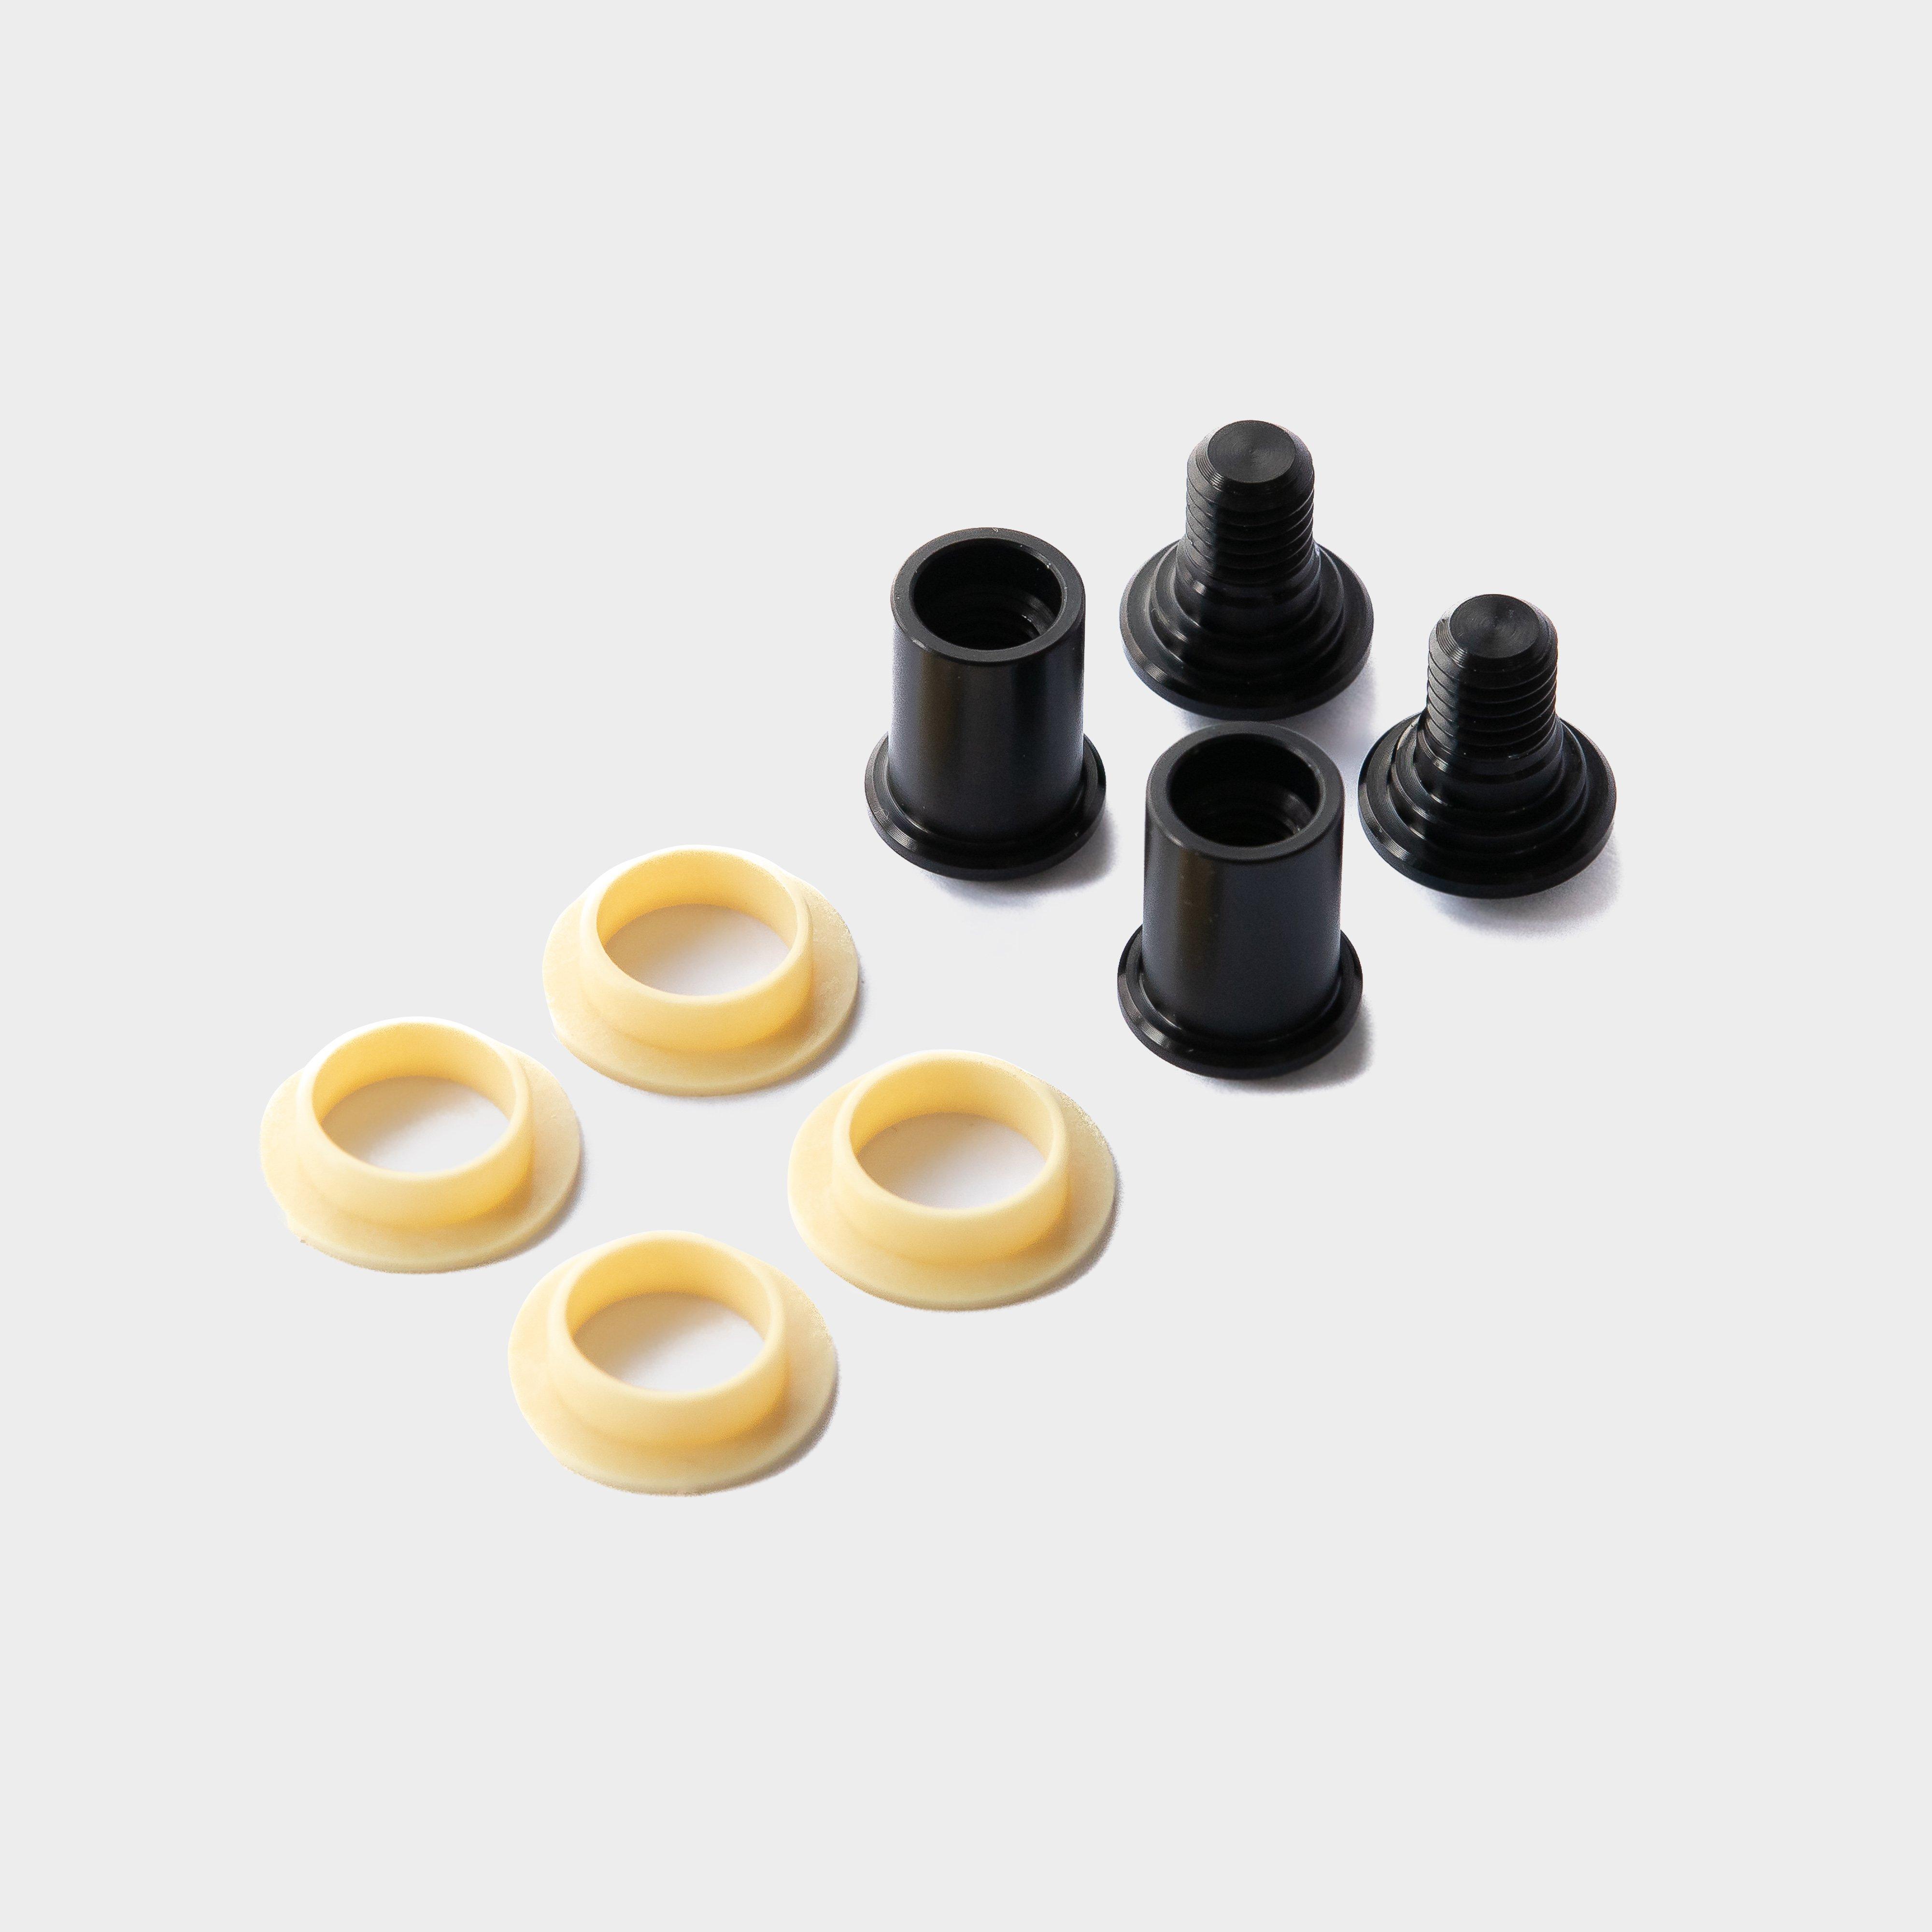  Calibre Sentry V2 Chainstay to Seatstay Bolt and Bushing Kit, Multi Coloured